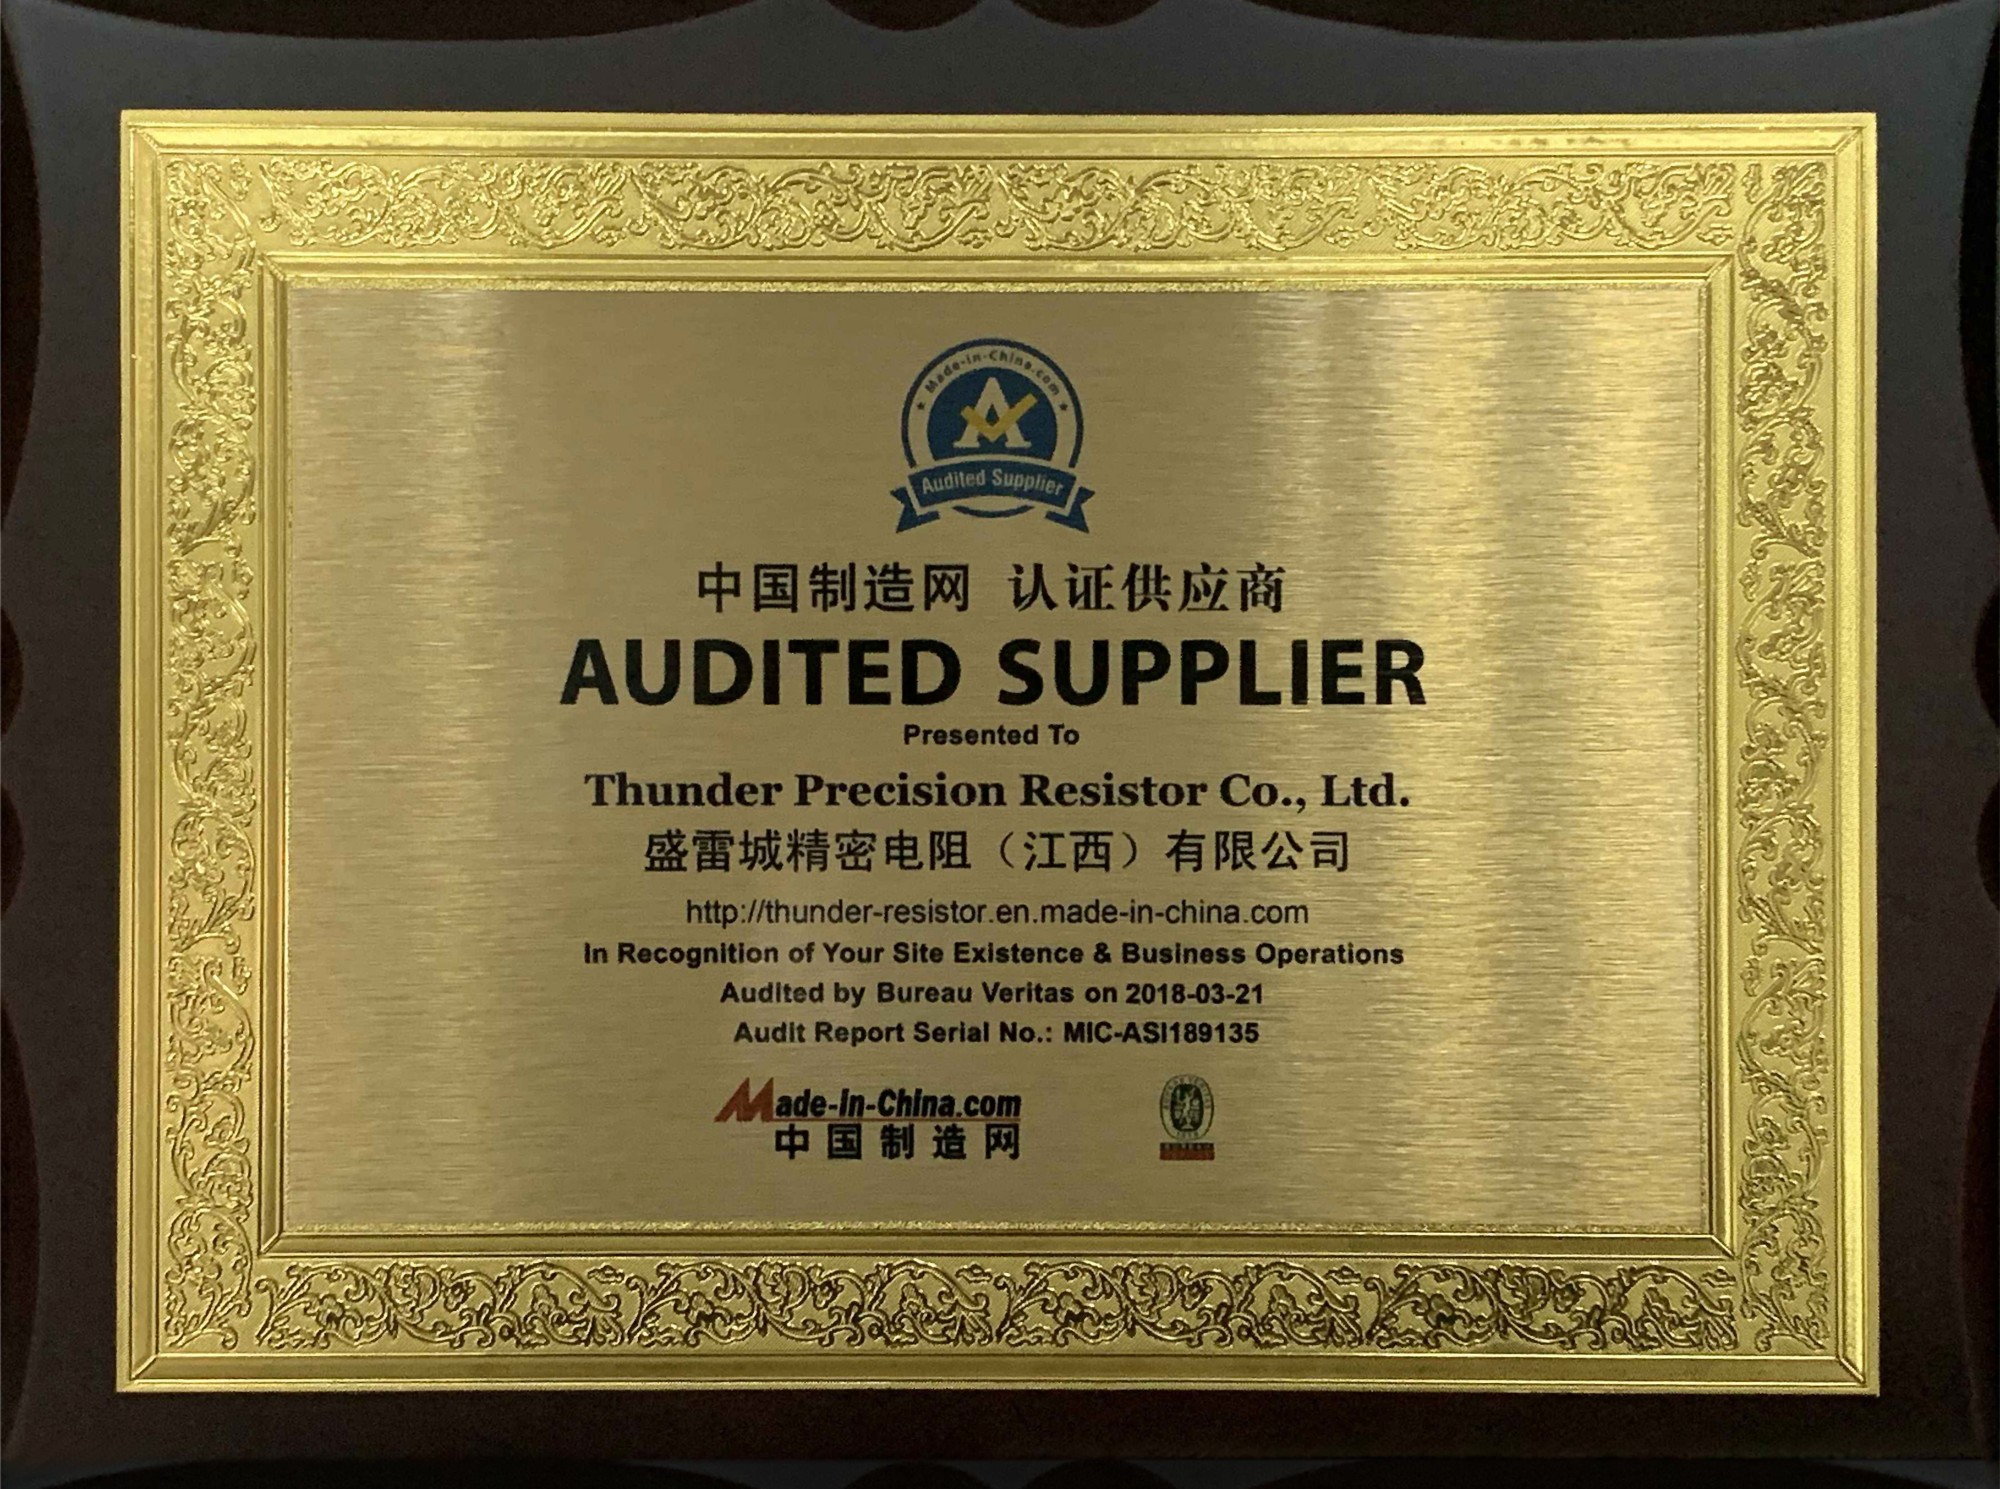 Certificato made in China